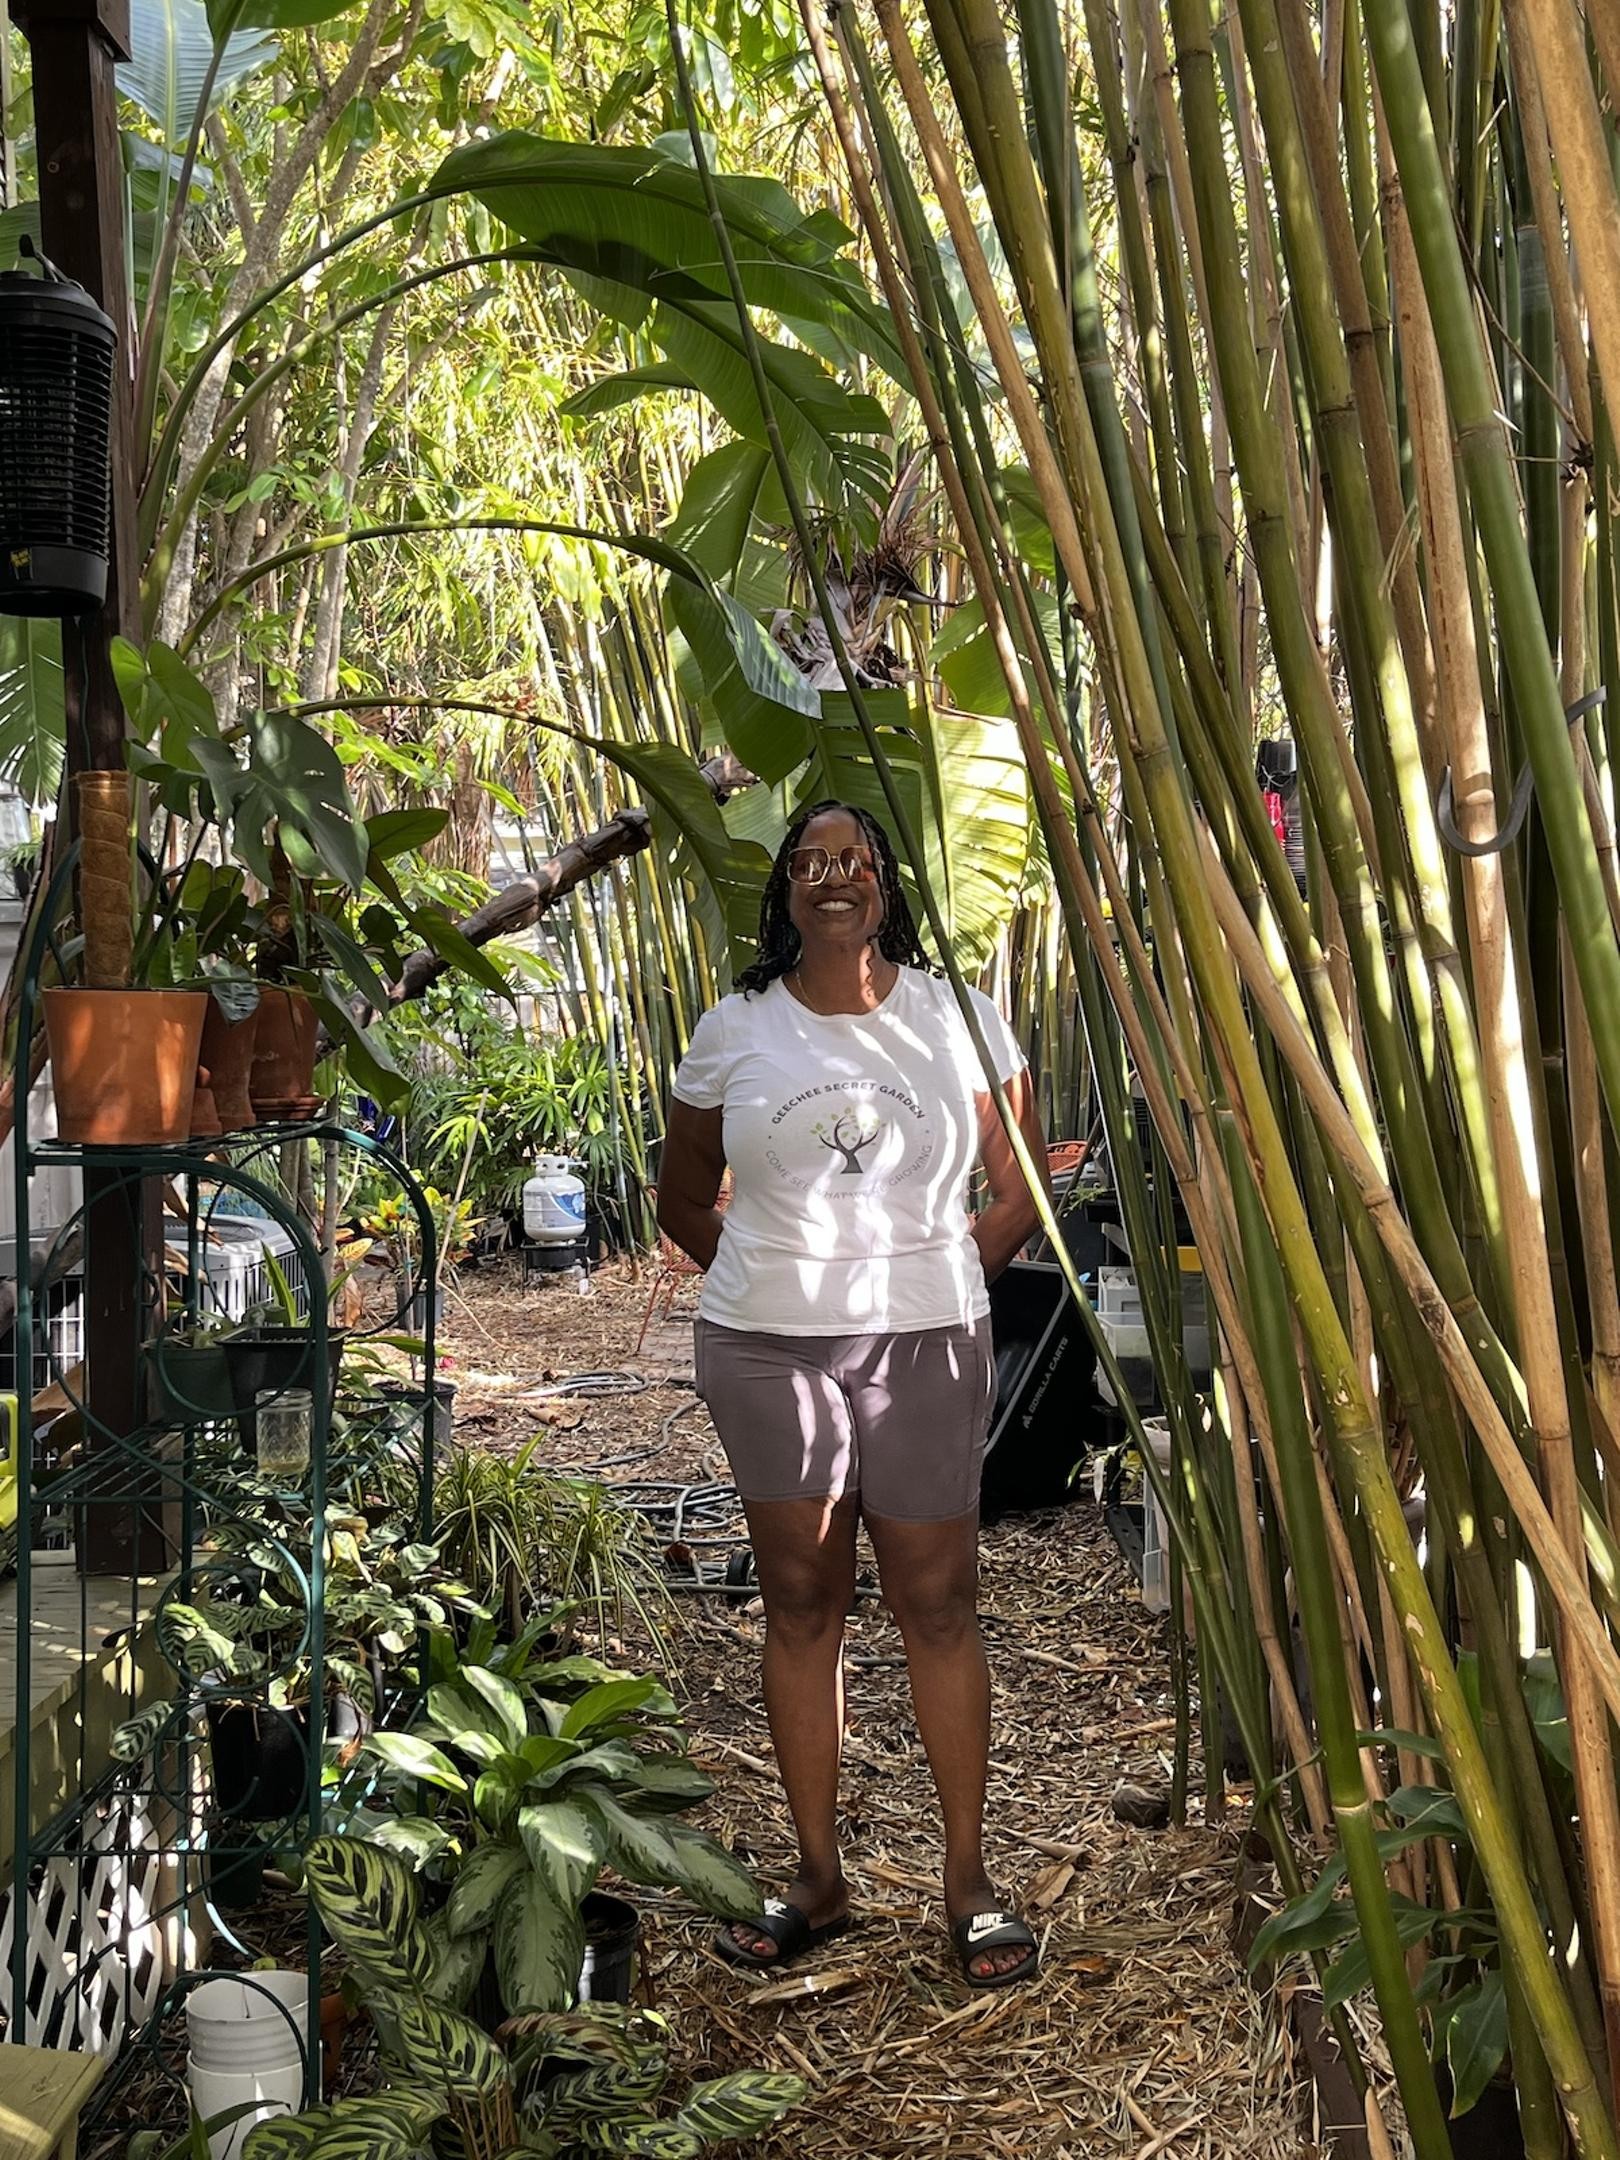 Senoia Brantley has created 'Geechee Secret Garden' next to her West Tampa home and it feels like it’s been there forever. - Photo by Linda Saul-Sena